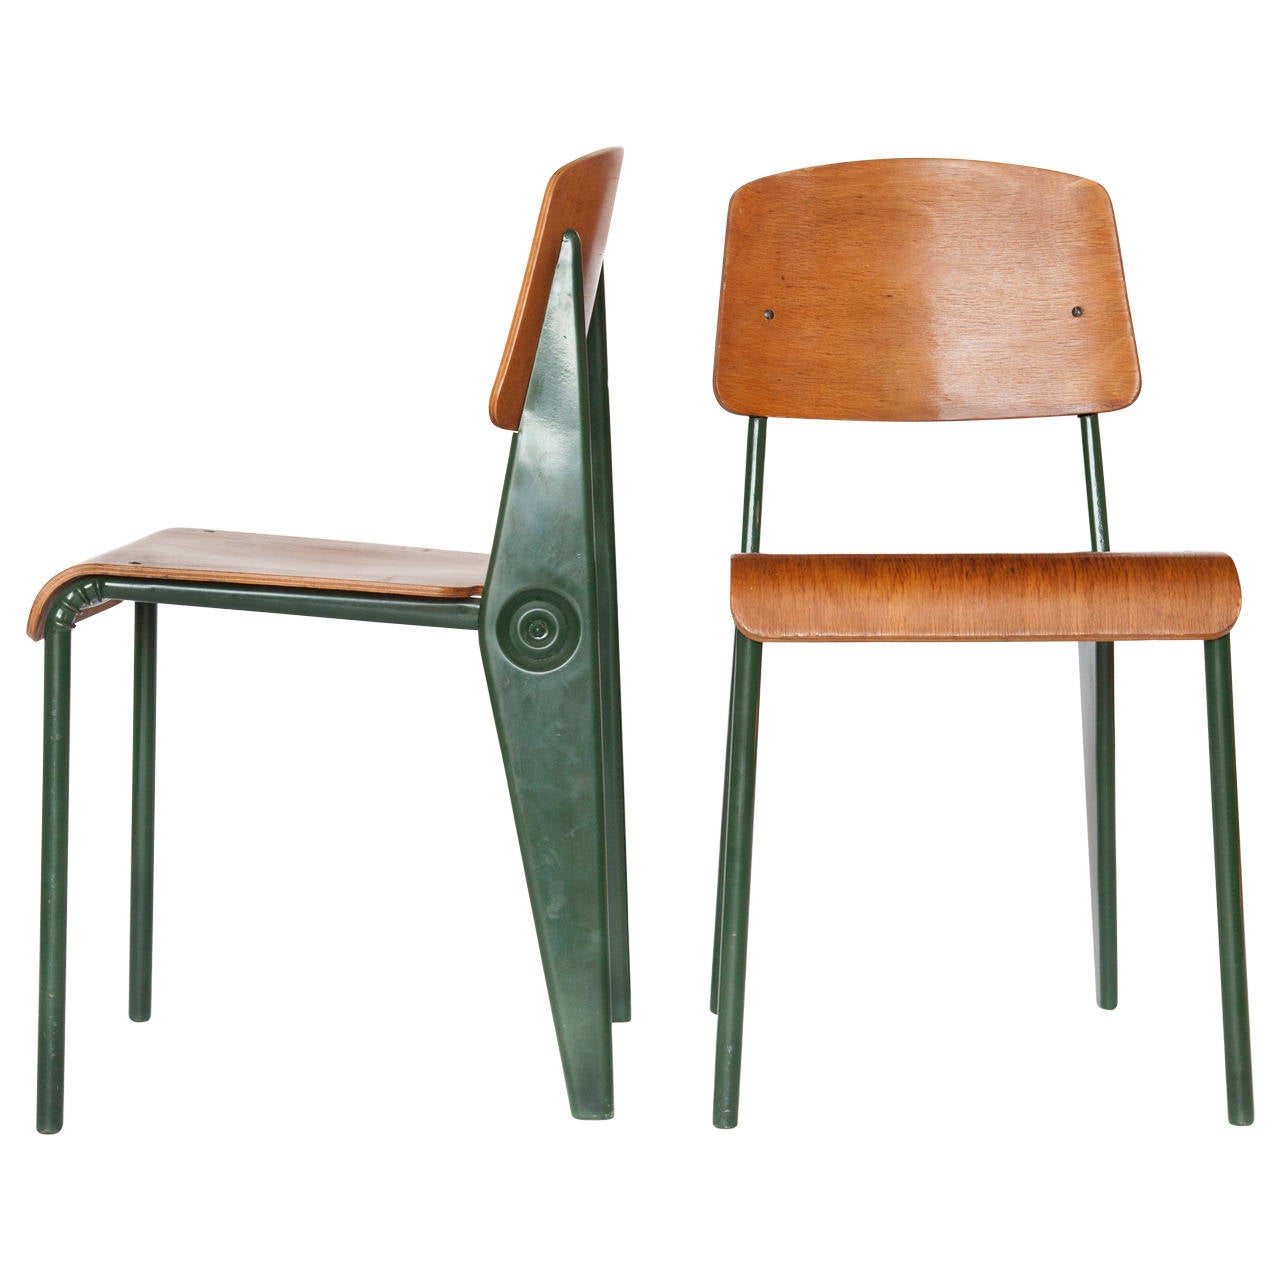 Pair of Rare Model No. 300 Demountable Chairs by Jean Prouvé at 1stDibs | jean  prouve chair vintage, demountable furniture